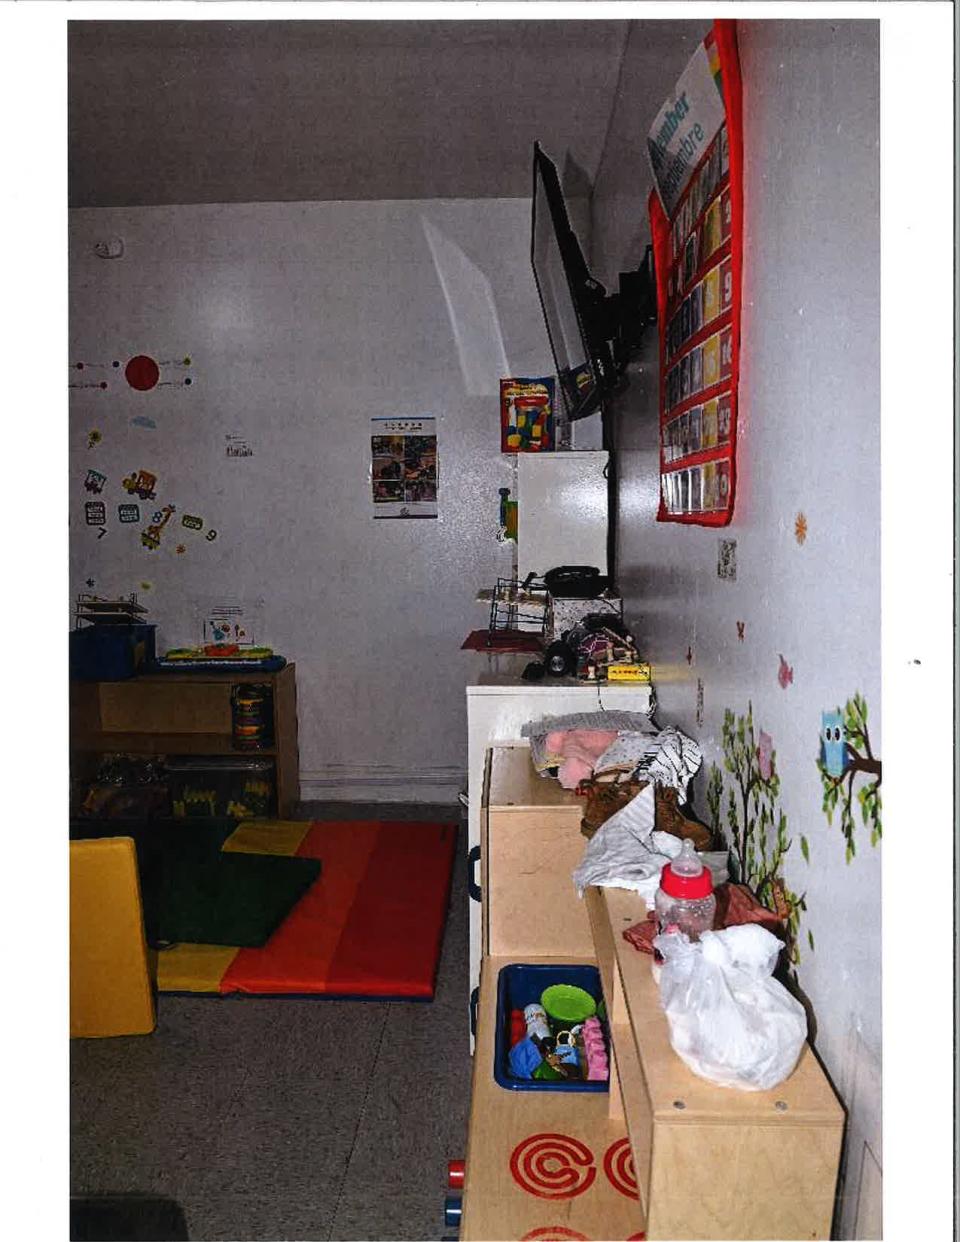 Photos shared by the Bronx District Attorney's Office show the Bronx day care where 1-year-old Nicholas Dominici died.